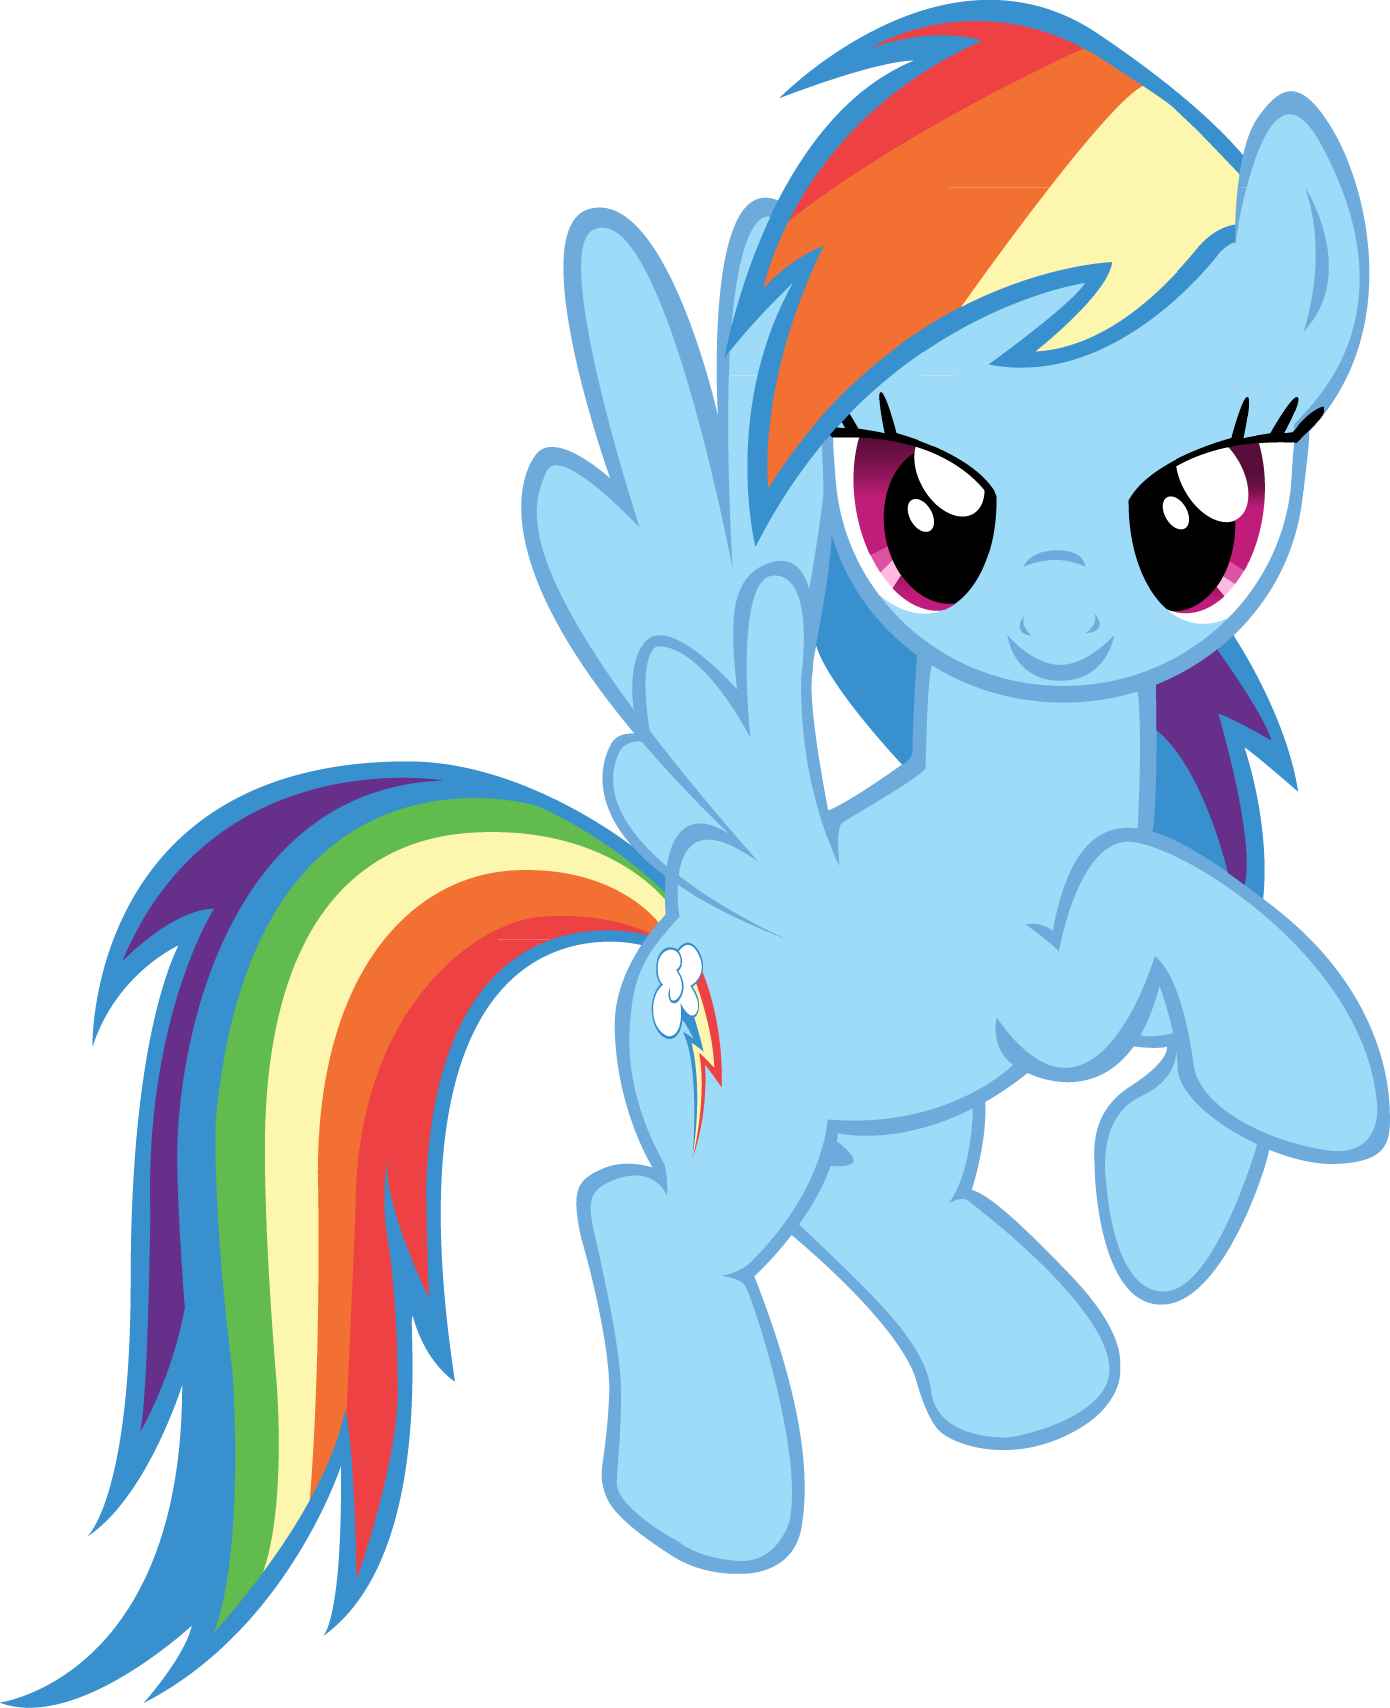 http://images4.wikia.nocookie.net/__cb20120709171354/theamazingworldofgumball/images/3/36/My_little_pony_rainbow_dash_desktop_1390x1708_wallpaper-1024310.png